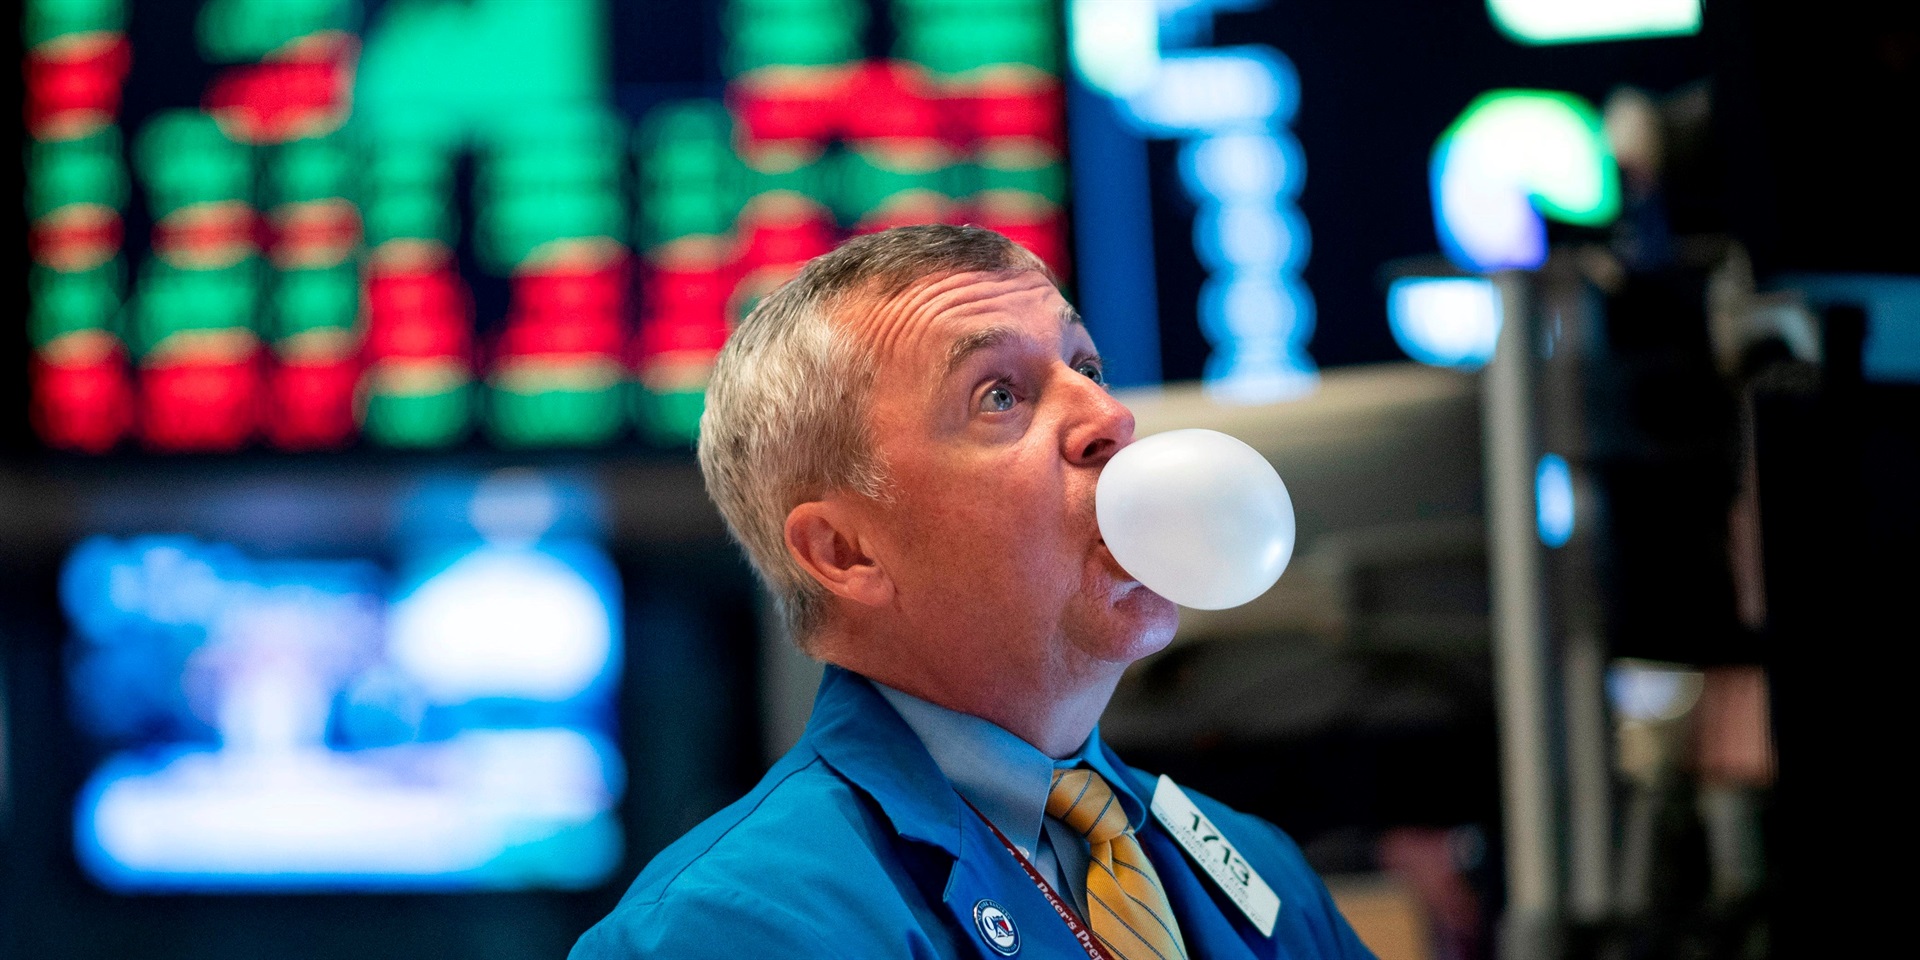 A trader blows bubble gum during the opening bell at the New York Stock Exchange (NYSE) on August 1, 2019, in New York City.
